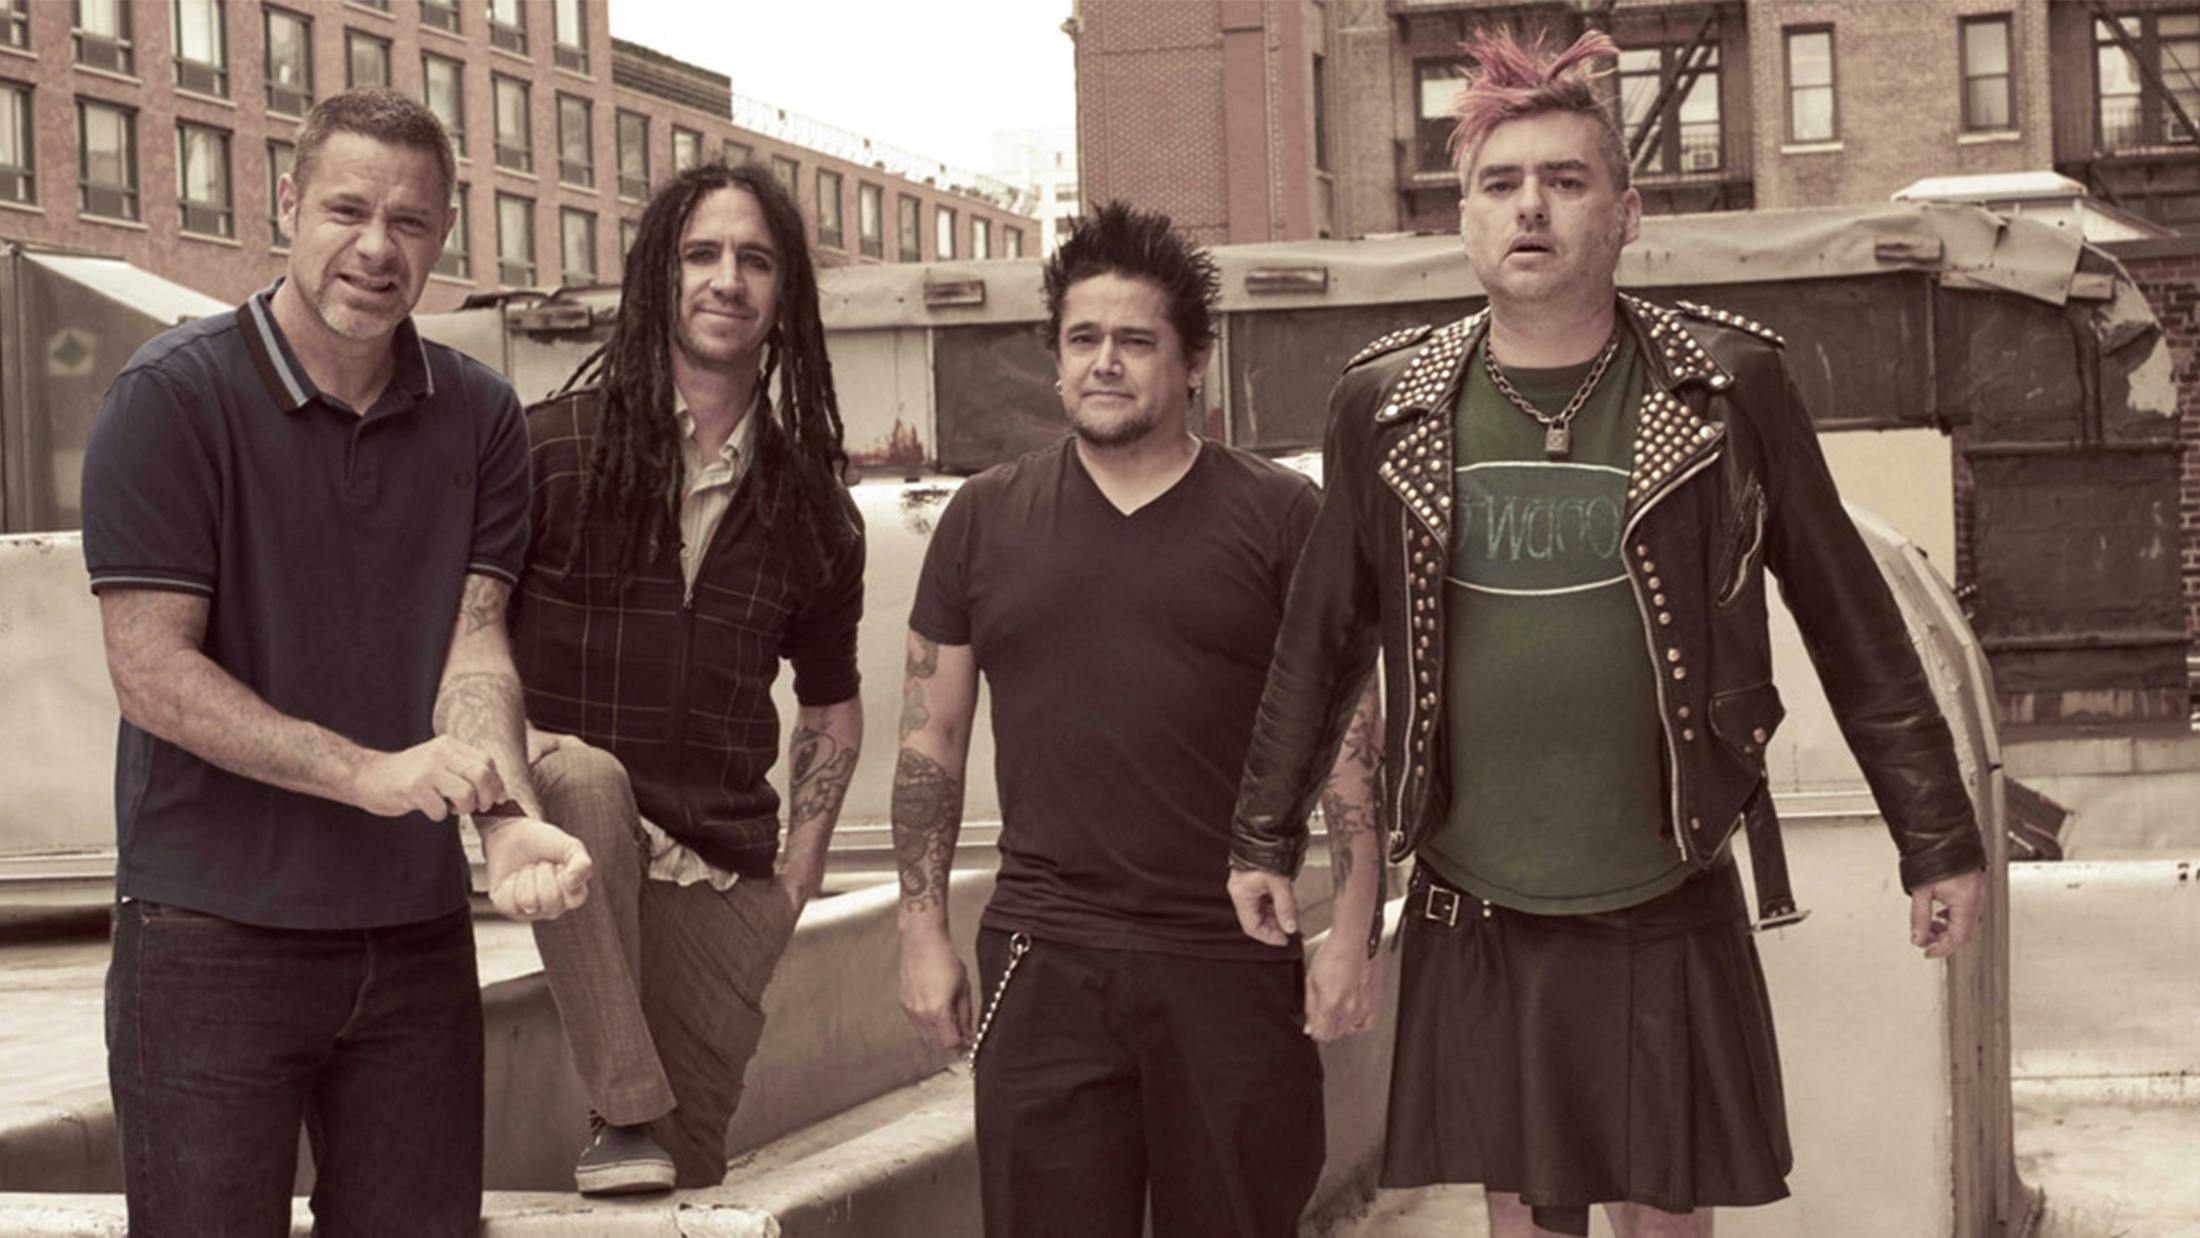 NOFX Seemingly Banned From Playing Larger Venues In The U.S.